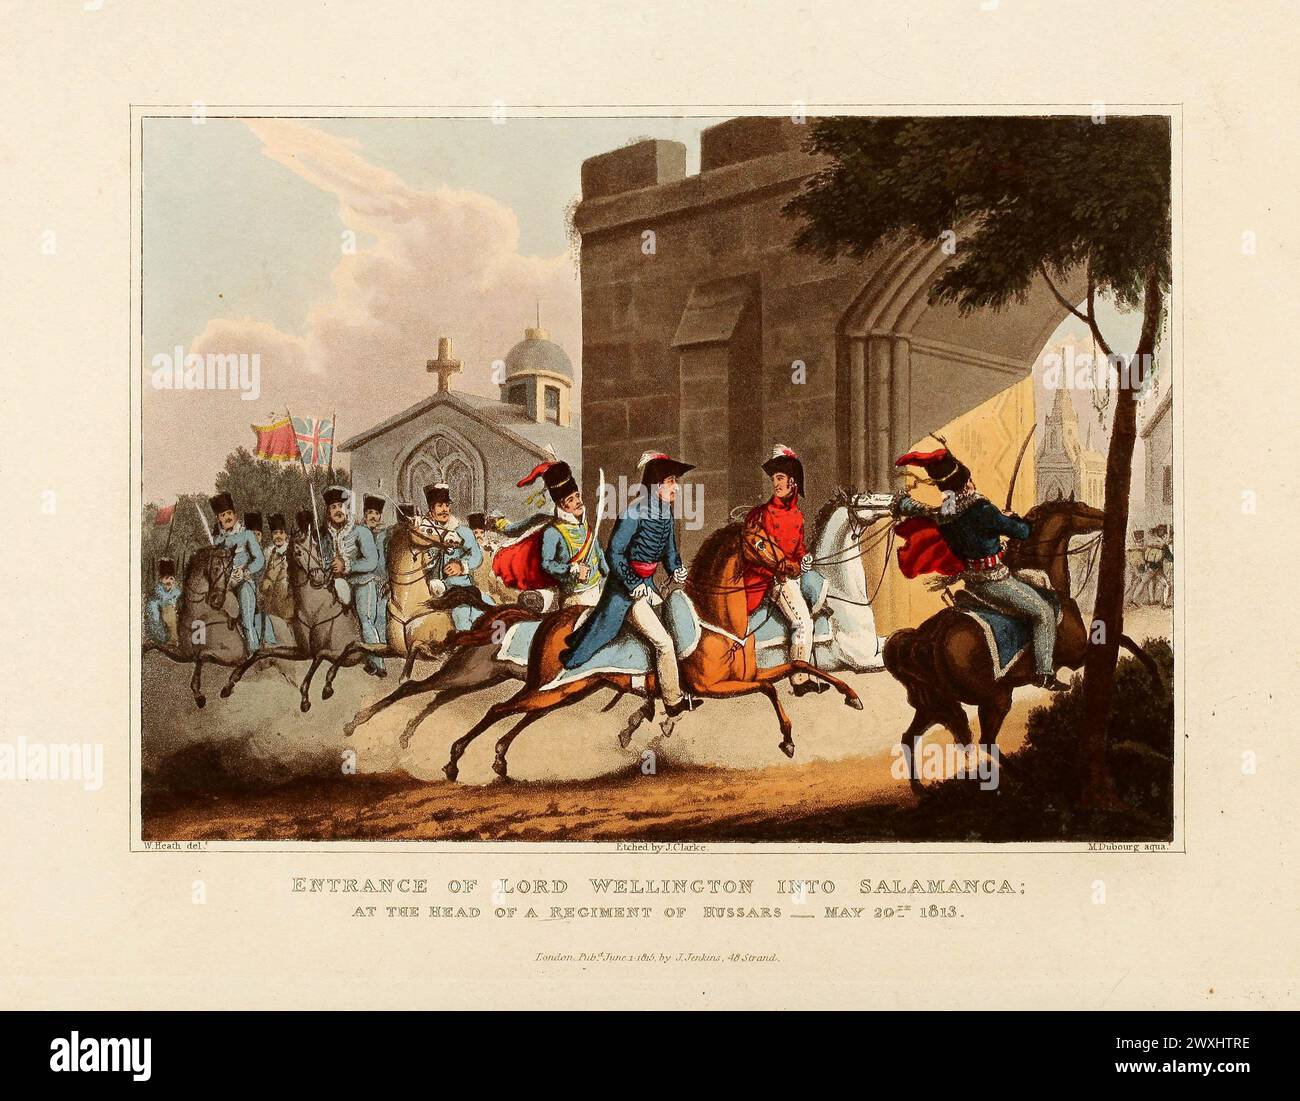 Entrance of Lord Wellington into Salamanca, at the head of a Regiment of Hussars, May 10, 1813. Vintage Coloured Aquatint, published by James Jenkins, 1815,  from  The martial achievements of Great Britain and her allies : from 1799 to 1815. Stock Photo